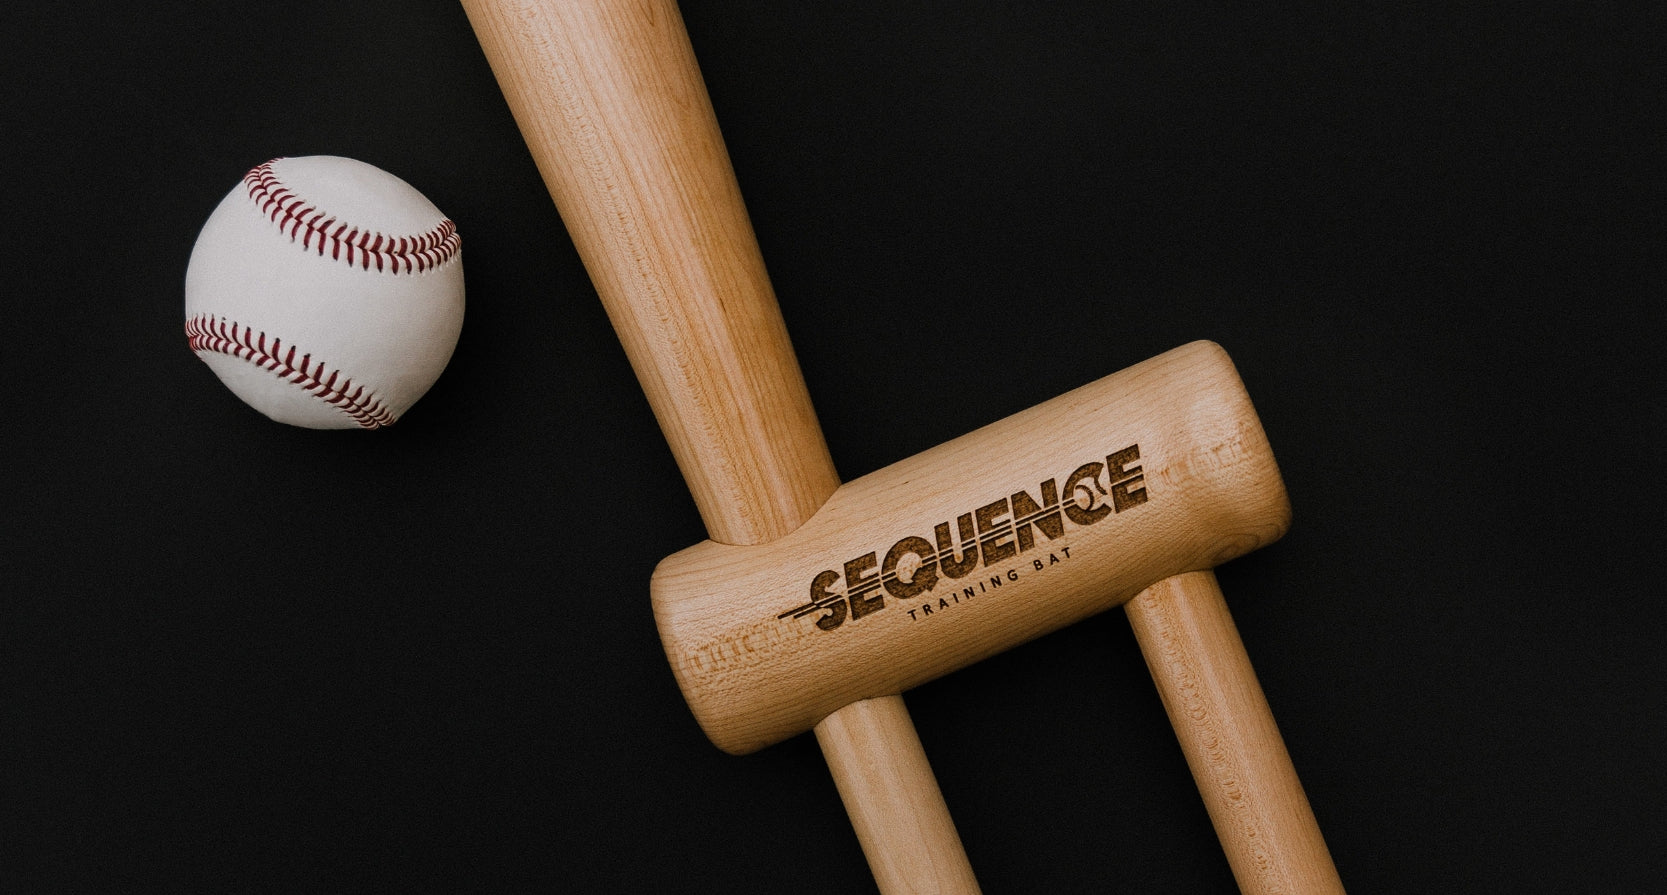 The Sequence Training Bat